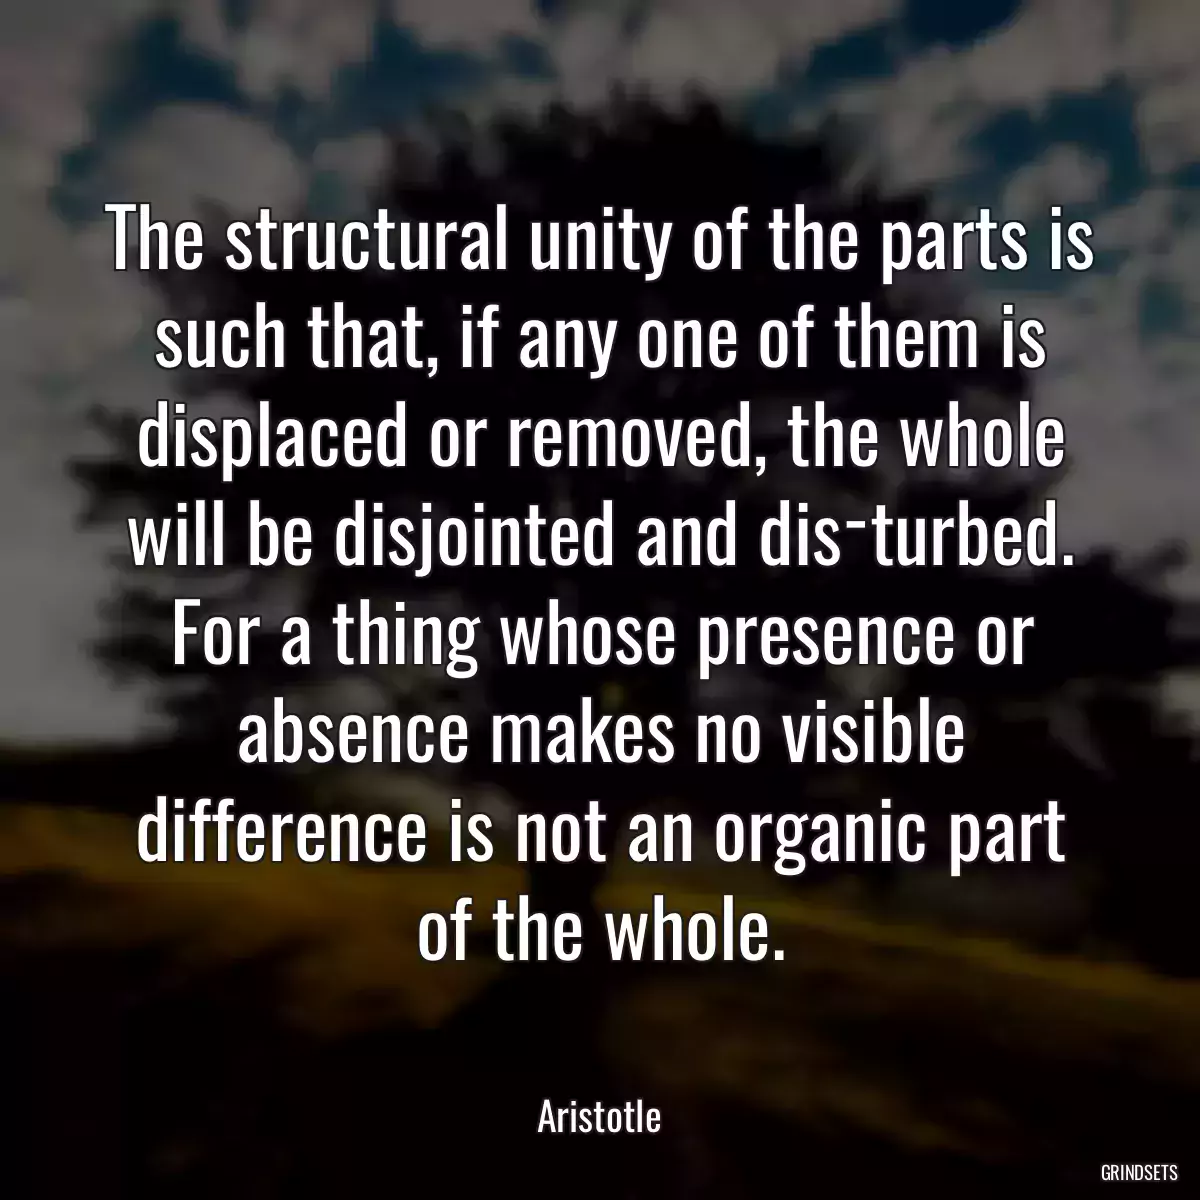 The structural unity of the parts is such that, if any one of them is displaced or removed, the whole will be disjointed and dis­turbed. For a thing whose presence or absence makes no visible difference is not an organic part of the whole.